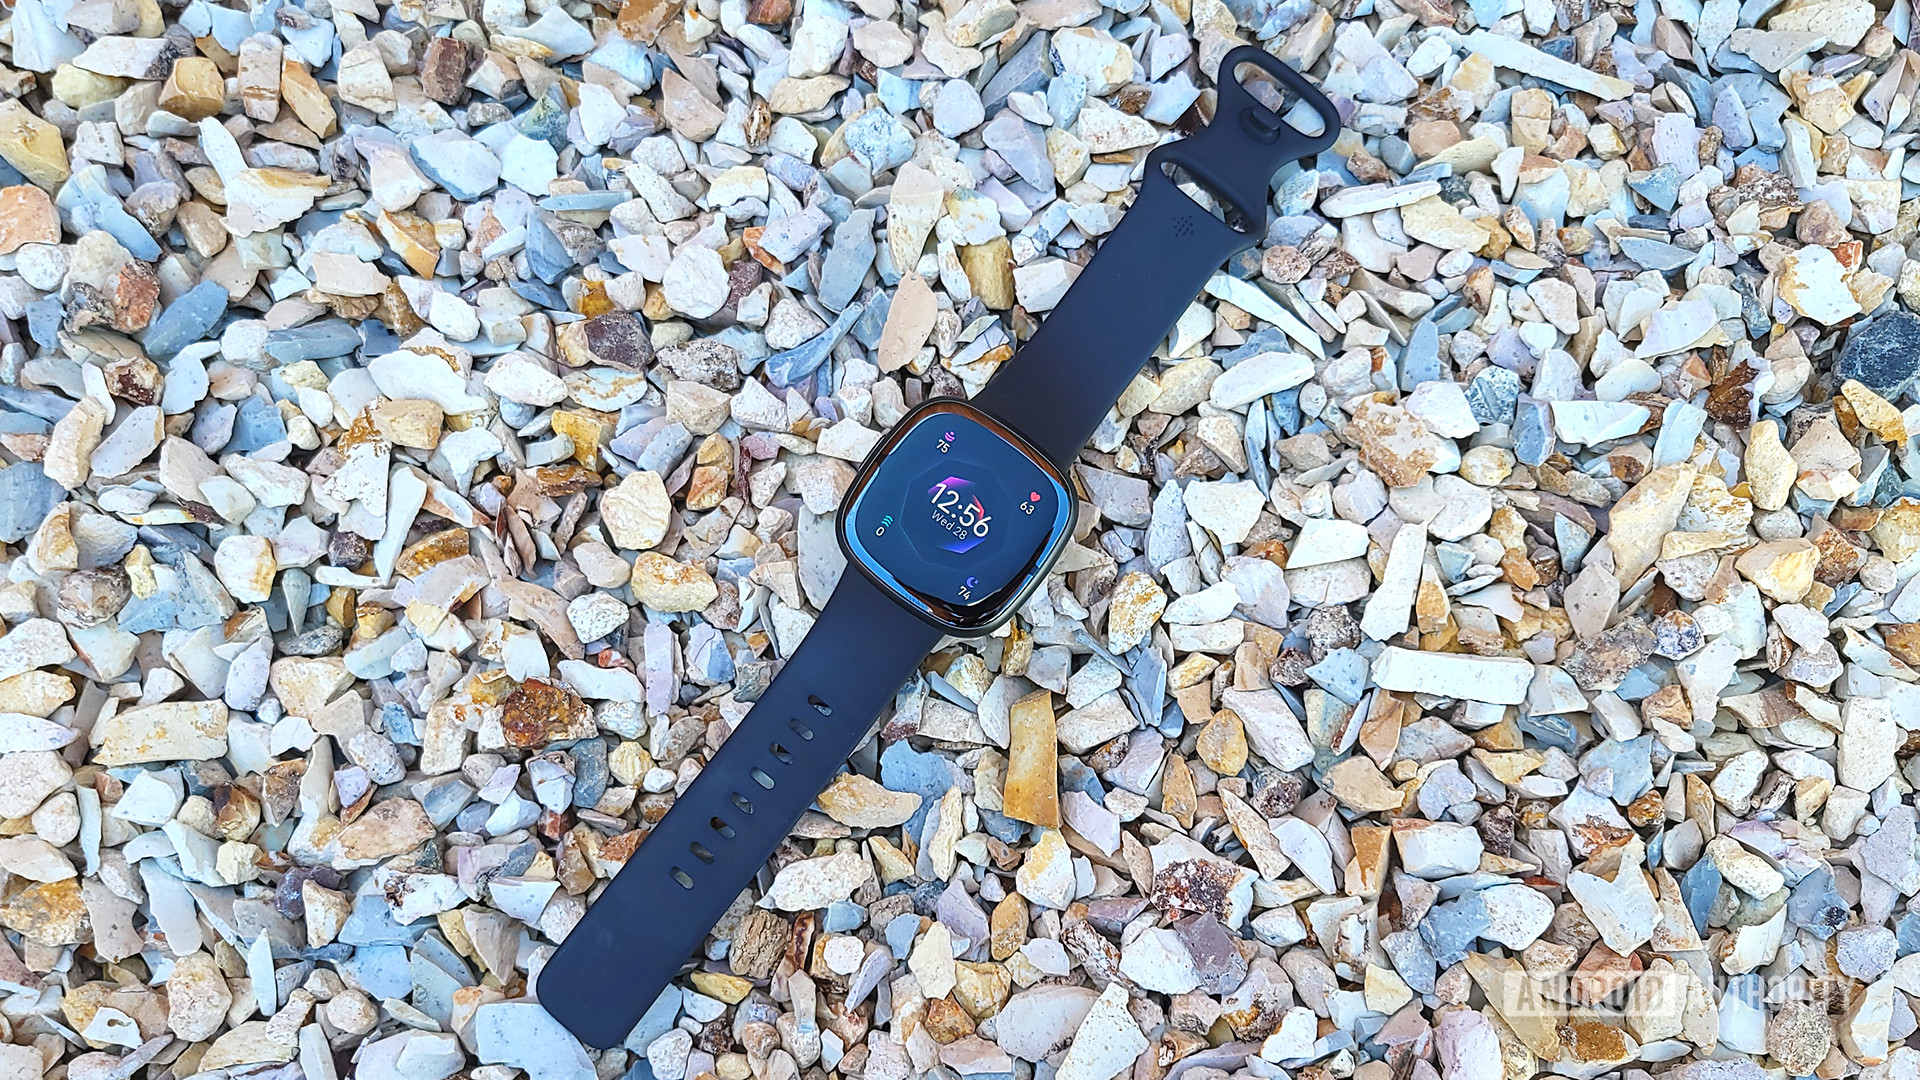 A Fitbit Sense 2 rests on pebbles, display a watch face.